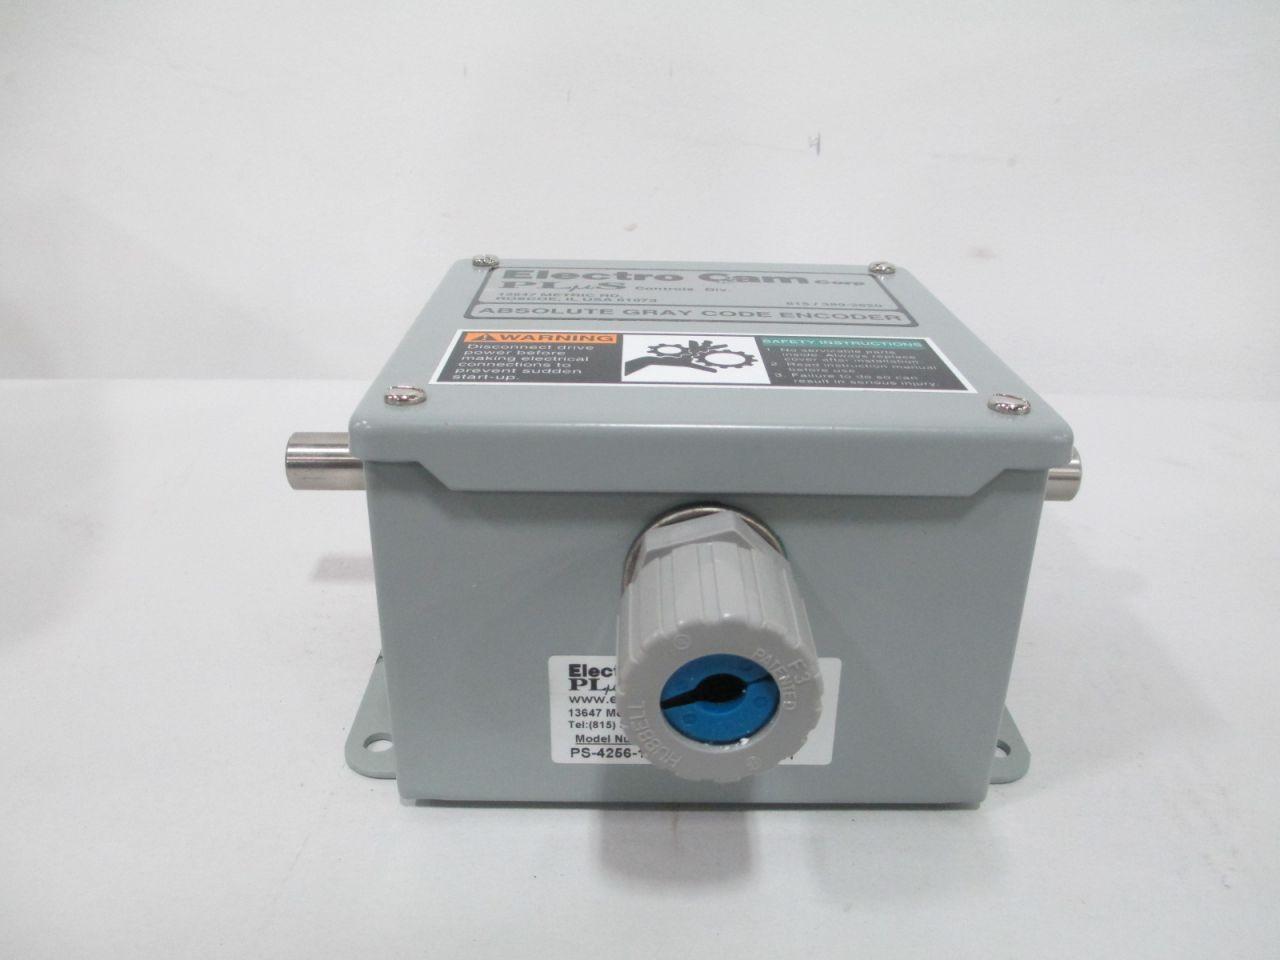 Electro Cam PS-4256-11-DDR Absolute Gray Code Encoder